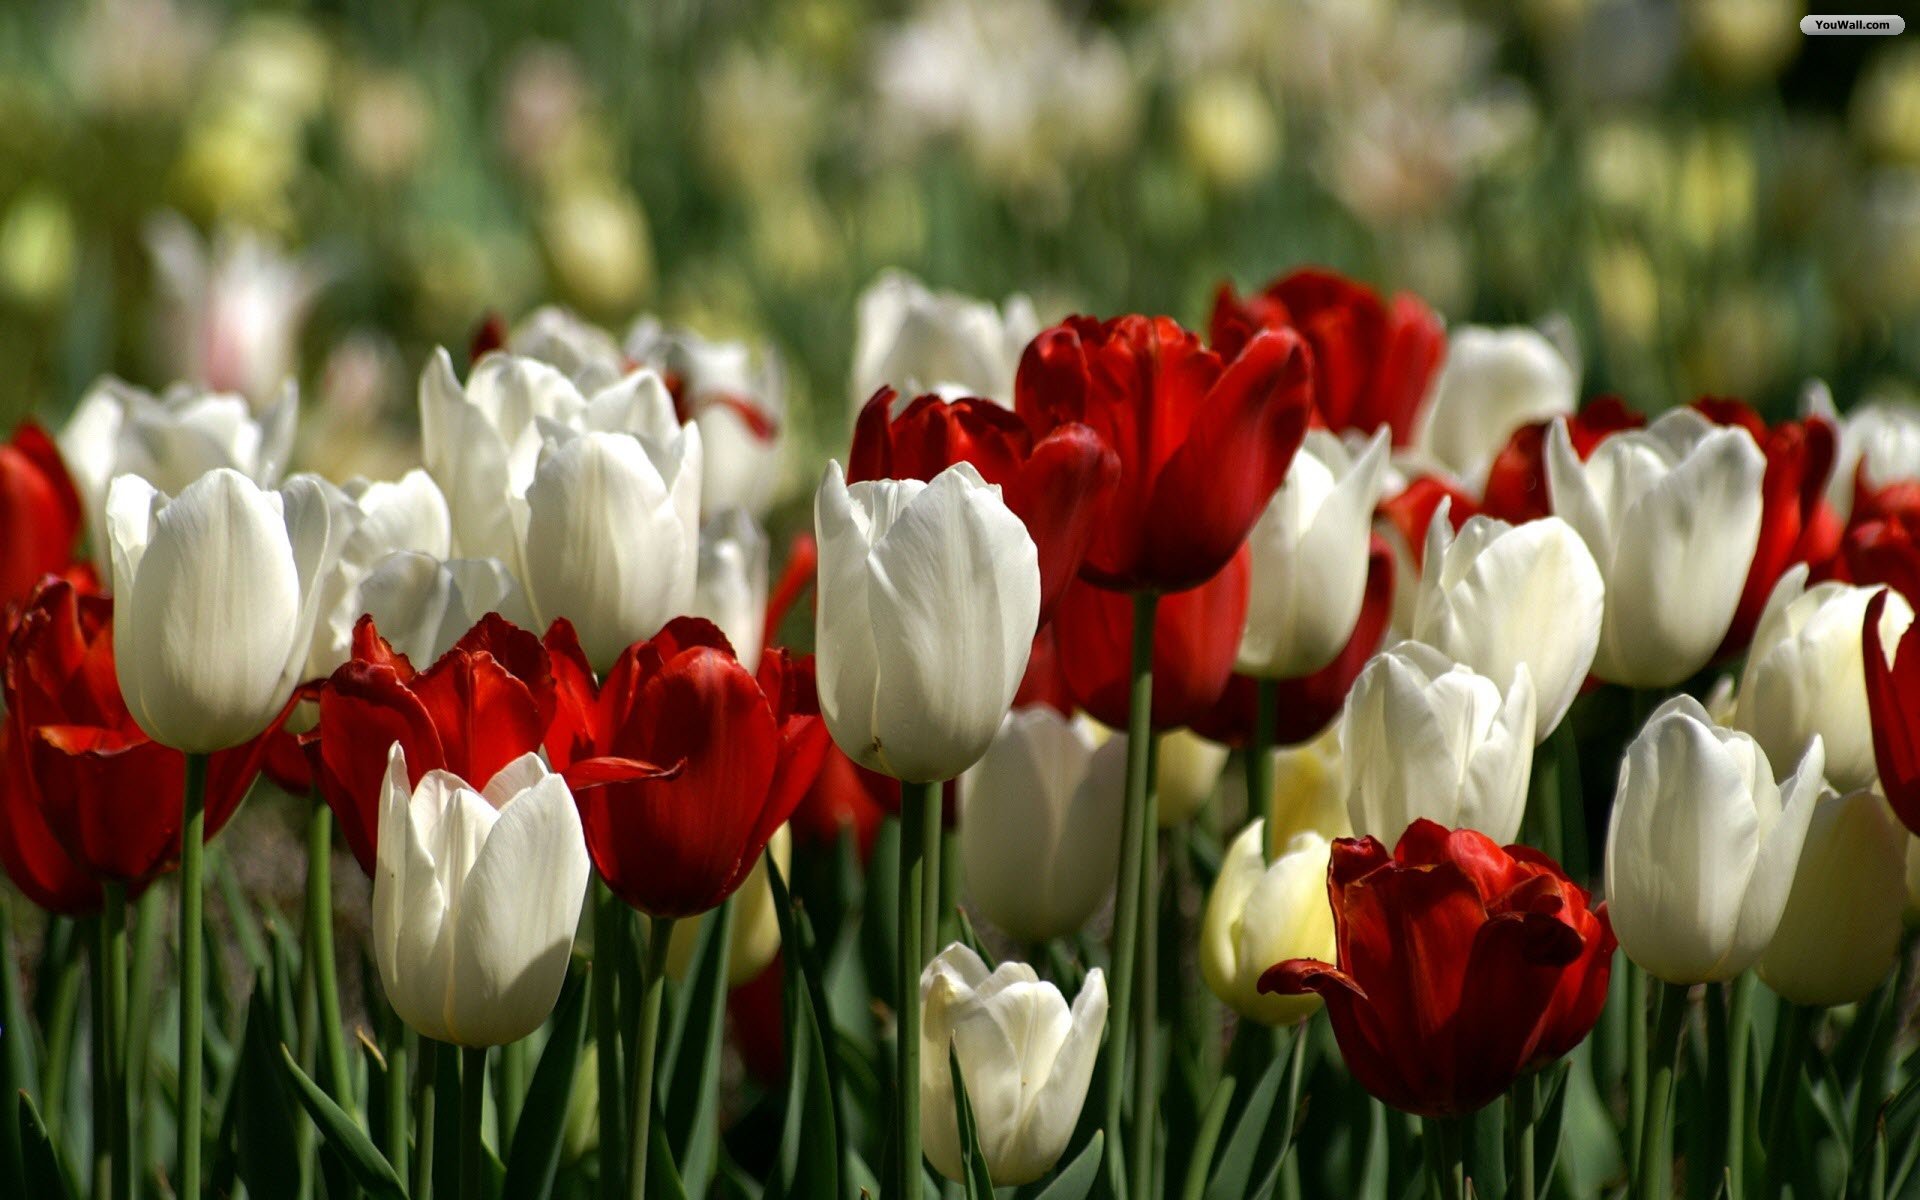 YouWall - White and Red Tulips Wallpaper - wallpaper,wallpapers